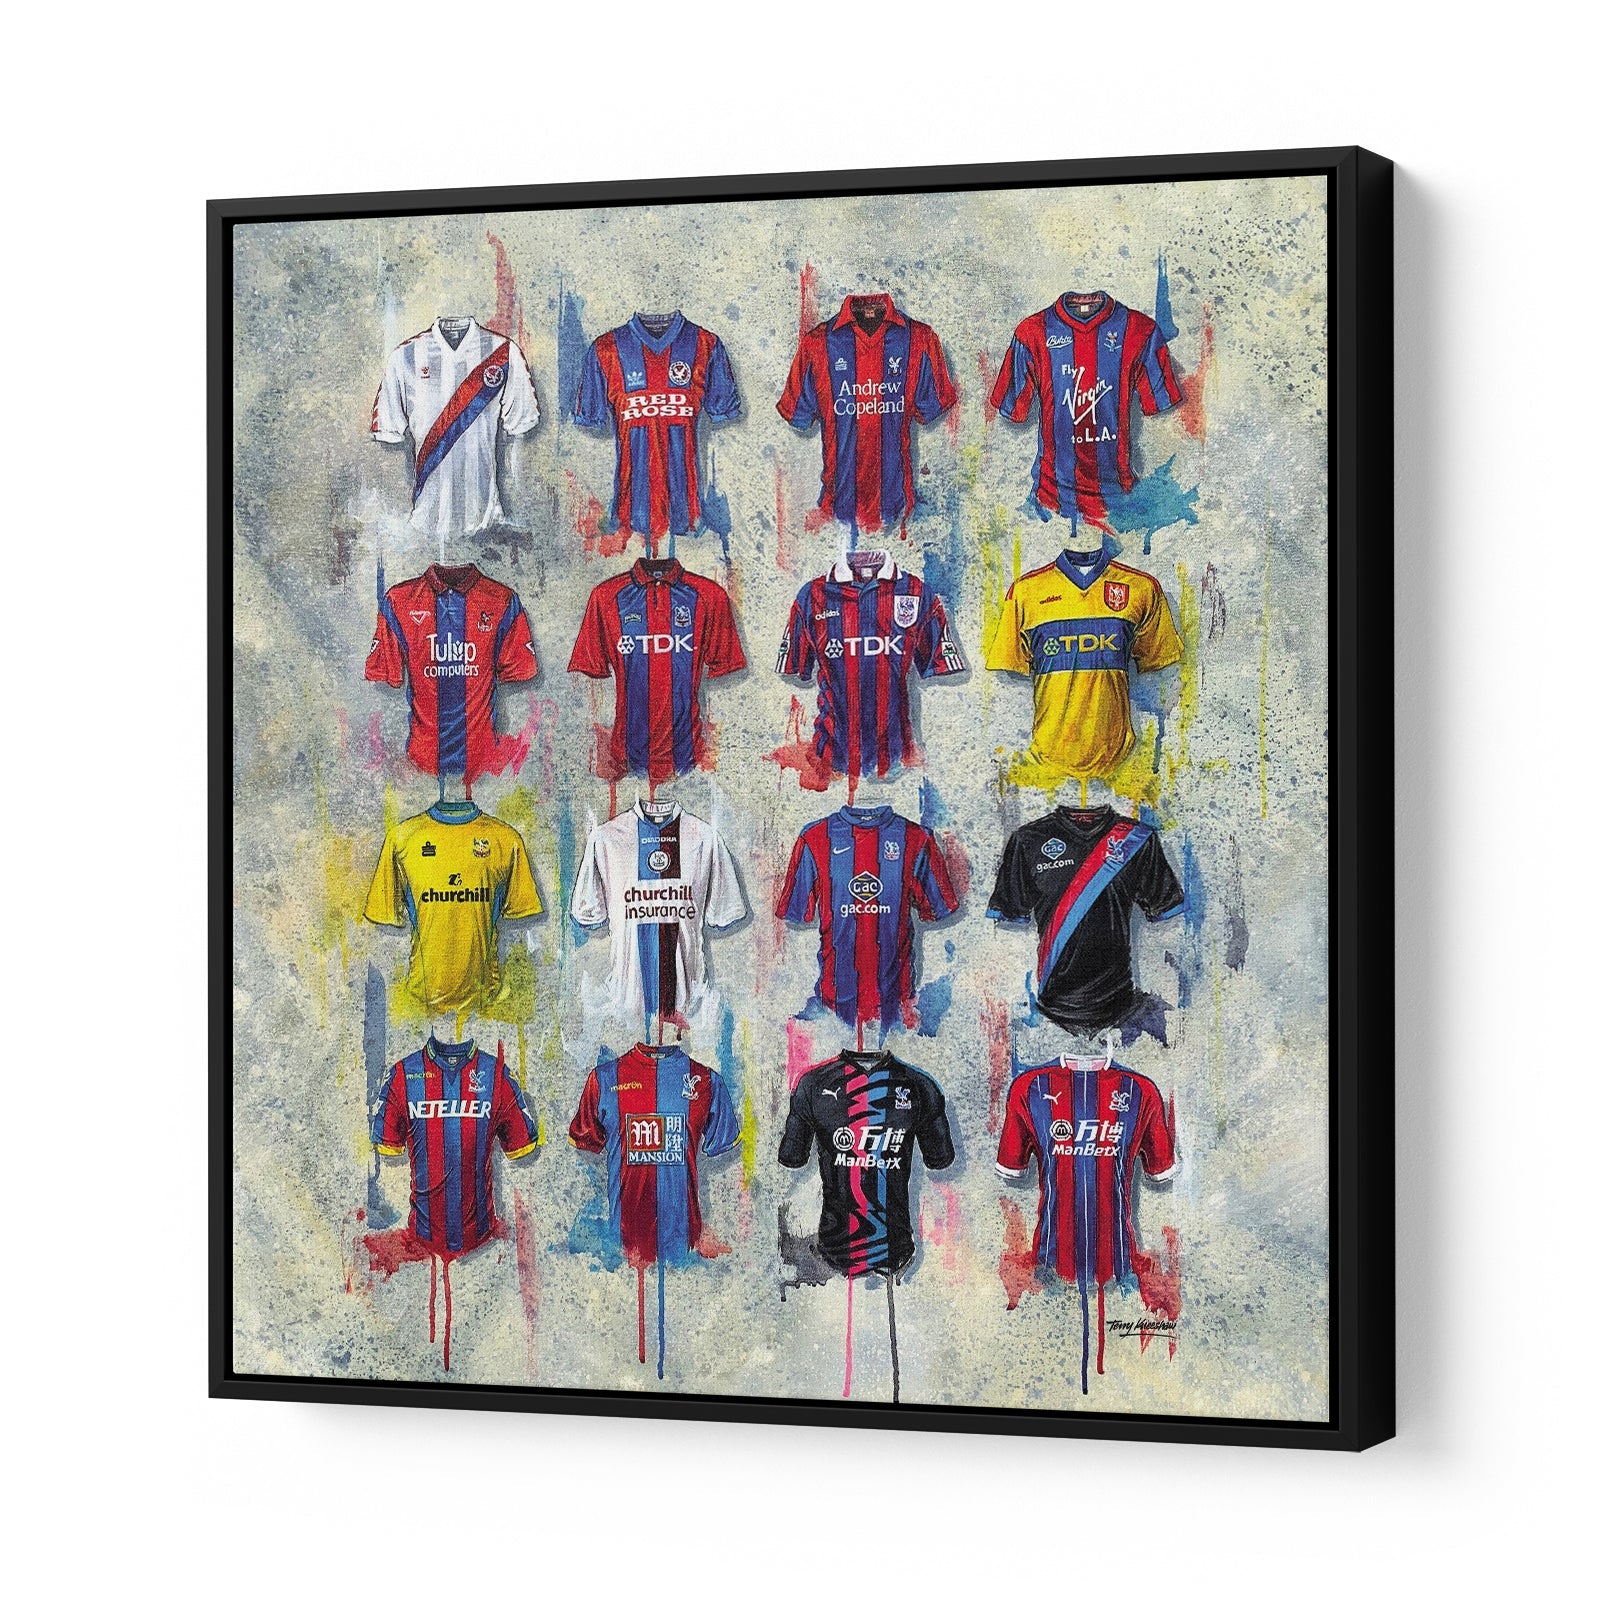 Terry Kneeshaw's Crystal Palace Canvases are an exceptional collection of football-inspired artwork featuring the team's iconic logos and colors. Available in various sizes, including 20x20, 30x30, and 40x40, each canvas can be framed or unframed with a black floating frame. These canvases are perfect for Crystal Palace fans and football enthusiasts alike and are a great addition to any space, capturing the essence of the team's history and legacy.